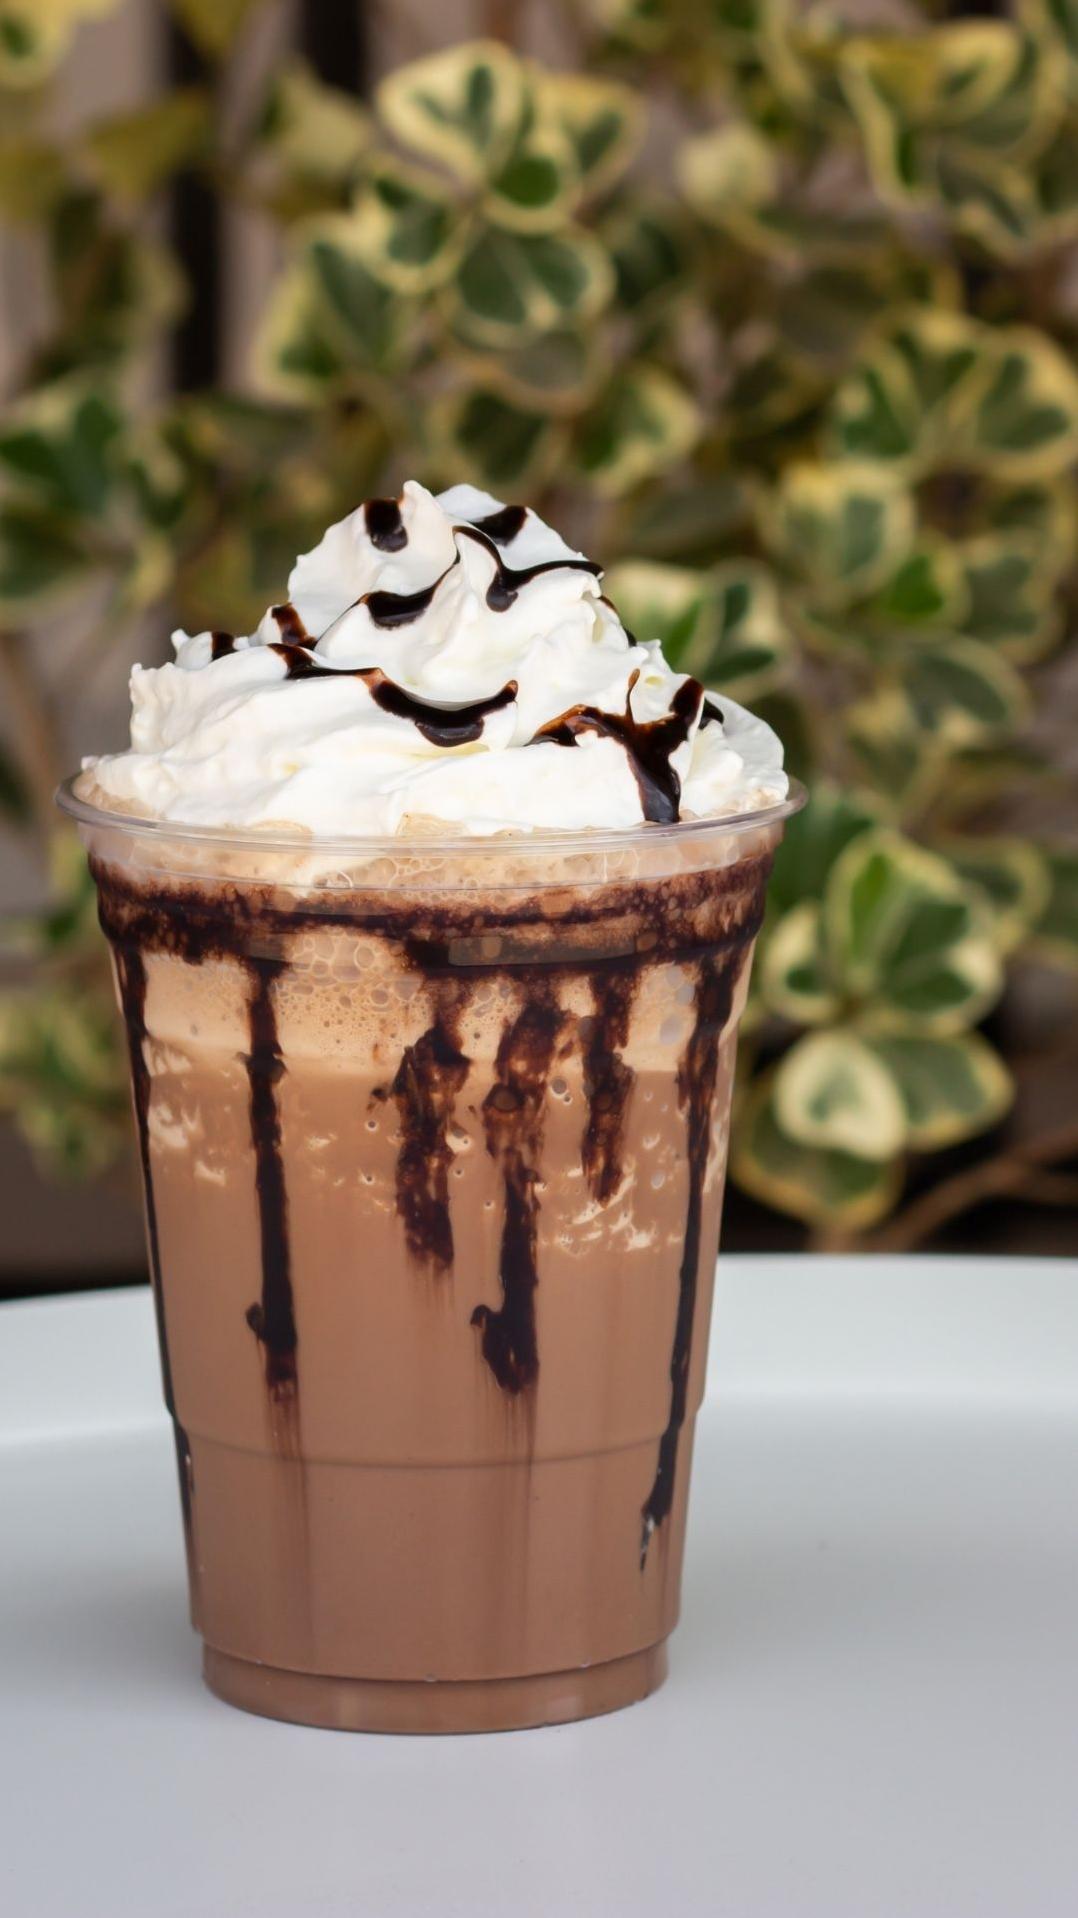  This Mocha Frappe is the perfect pick-me-up on a hot summer day.